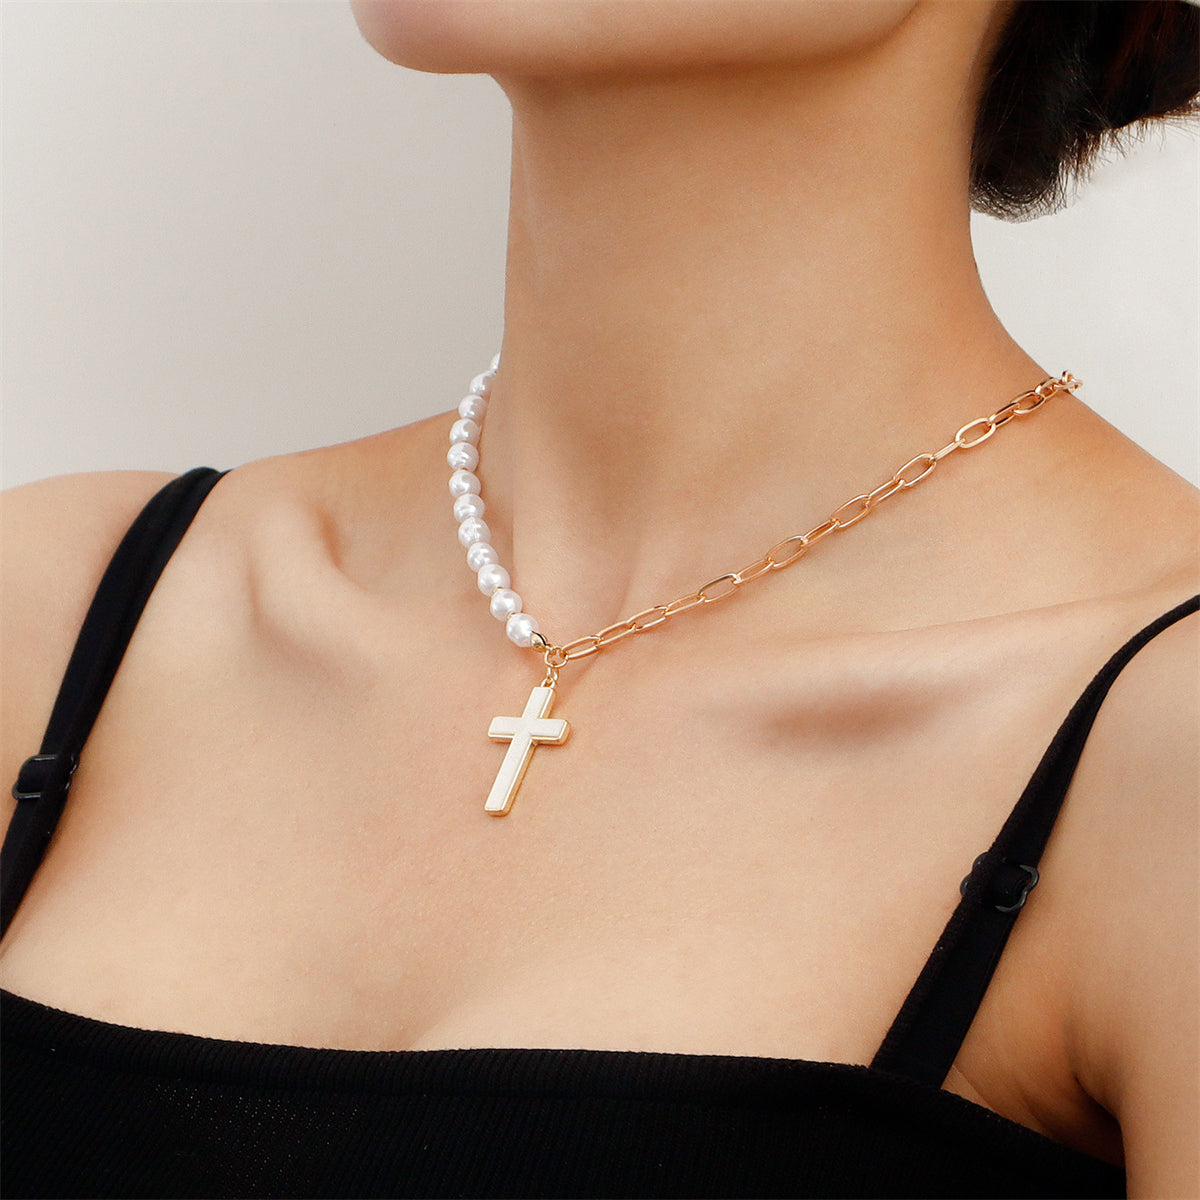 Shell & Pearl 18K Gold-Plated Cross Pendant Patchwork Necklace